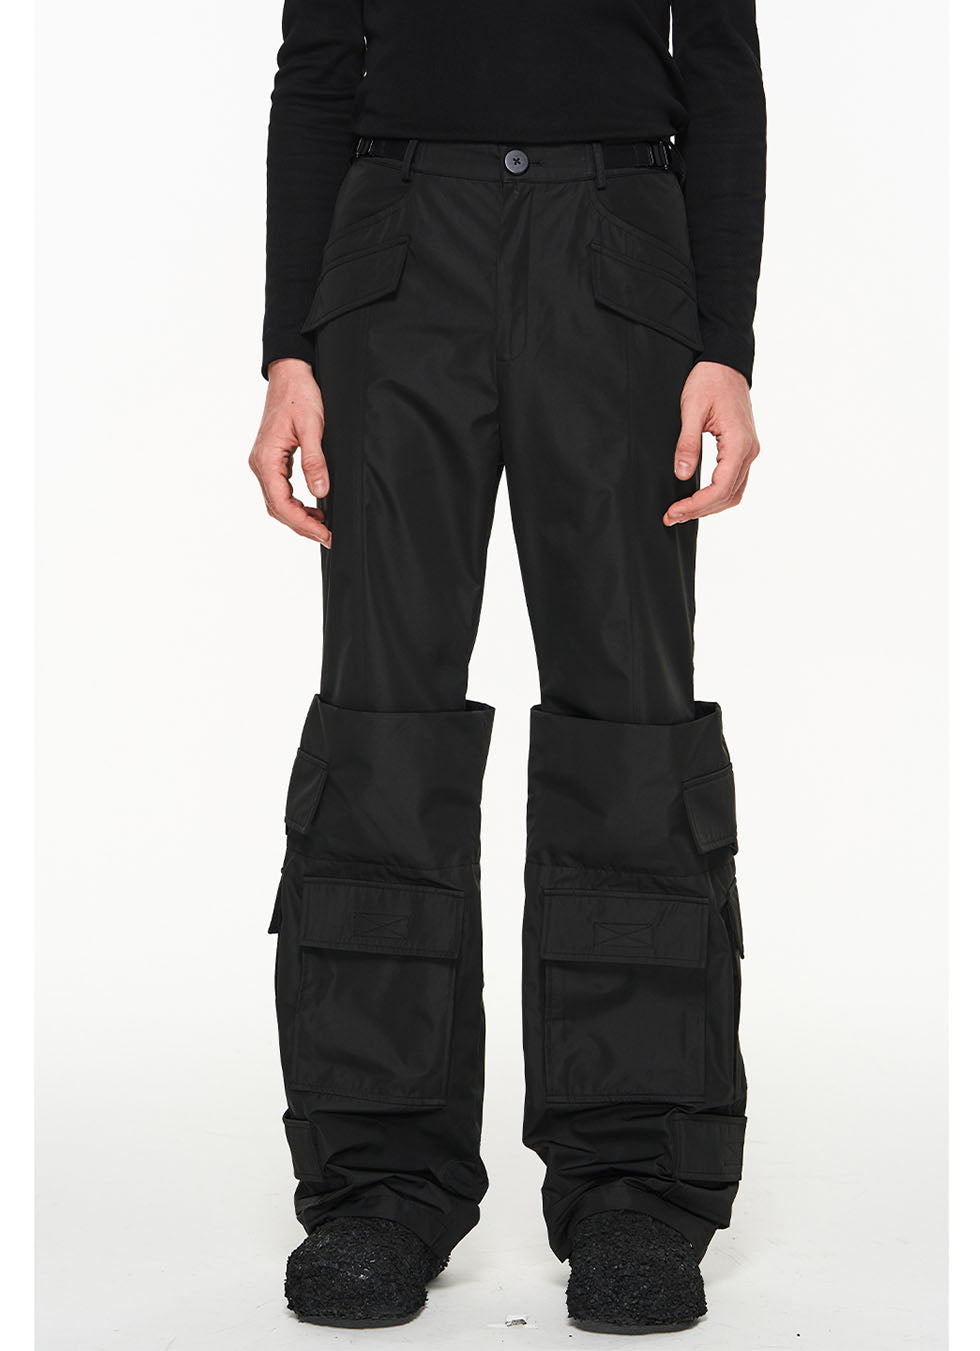 Boot-style layered pocket design pants